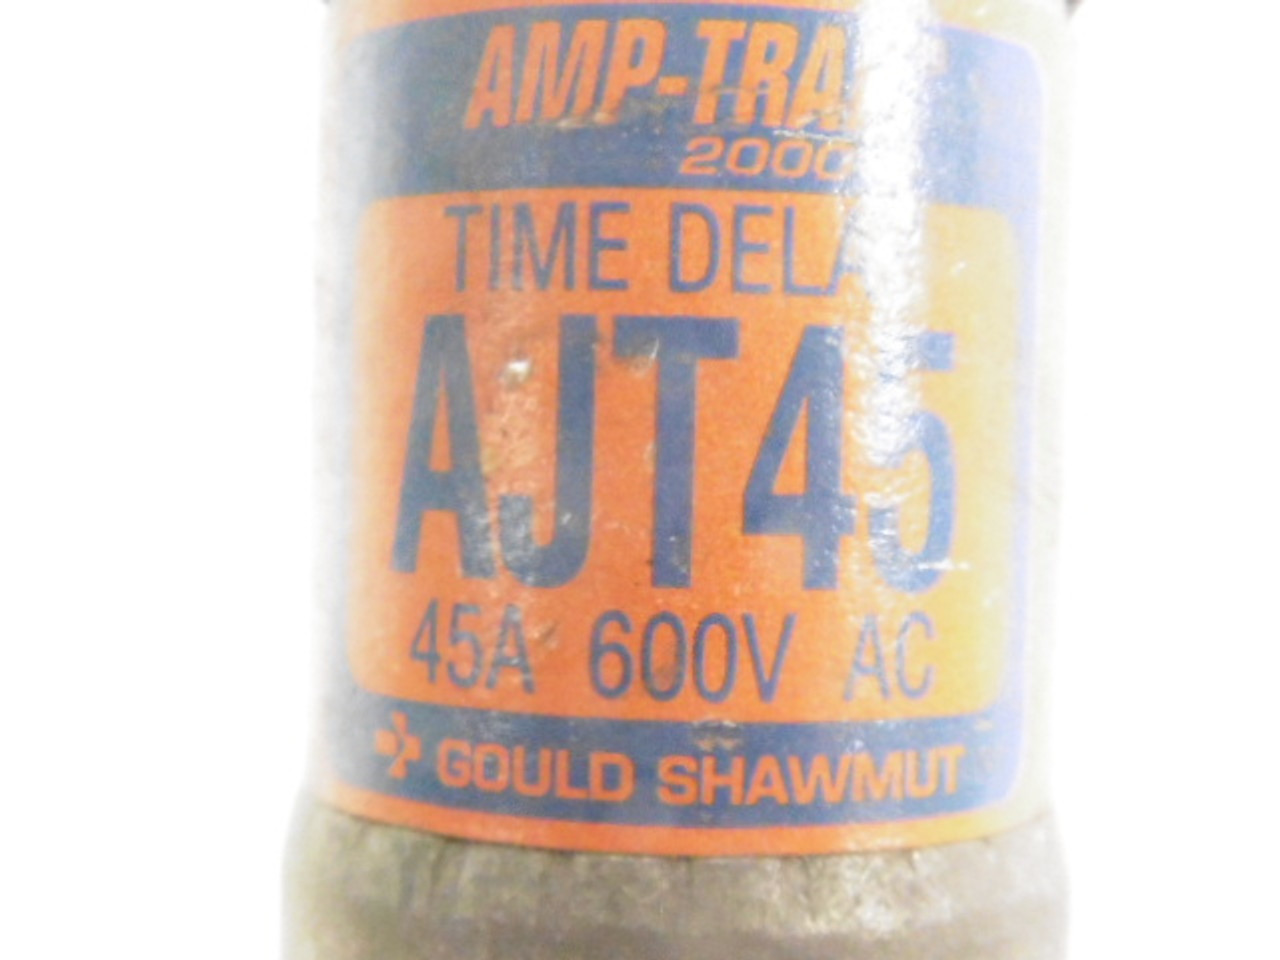 Gould Shawmut AJT45 Time Delay Fuse 45A 600V USED